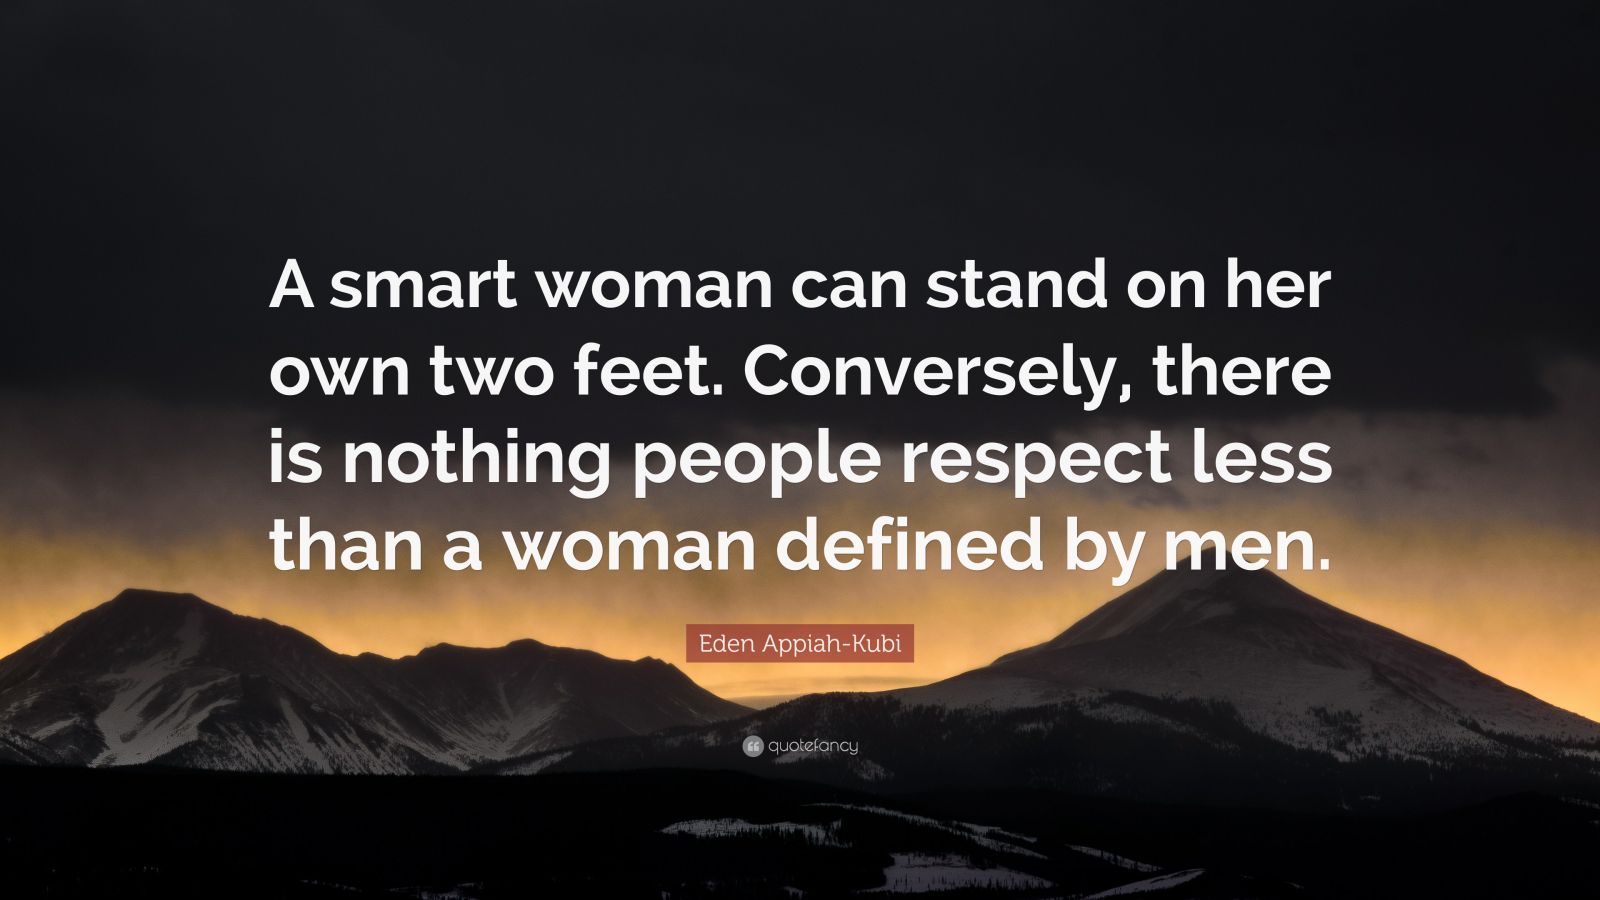 Eden Appiah-Kubi Quote: “A smart woman can stand on her own two feet ...